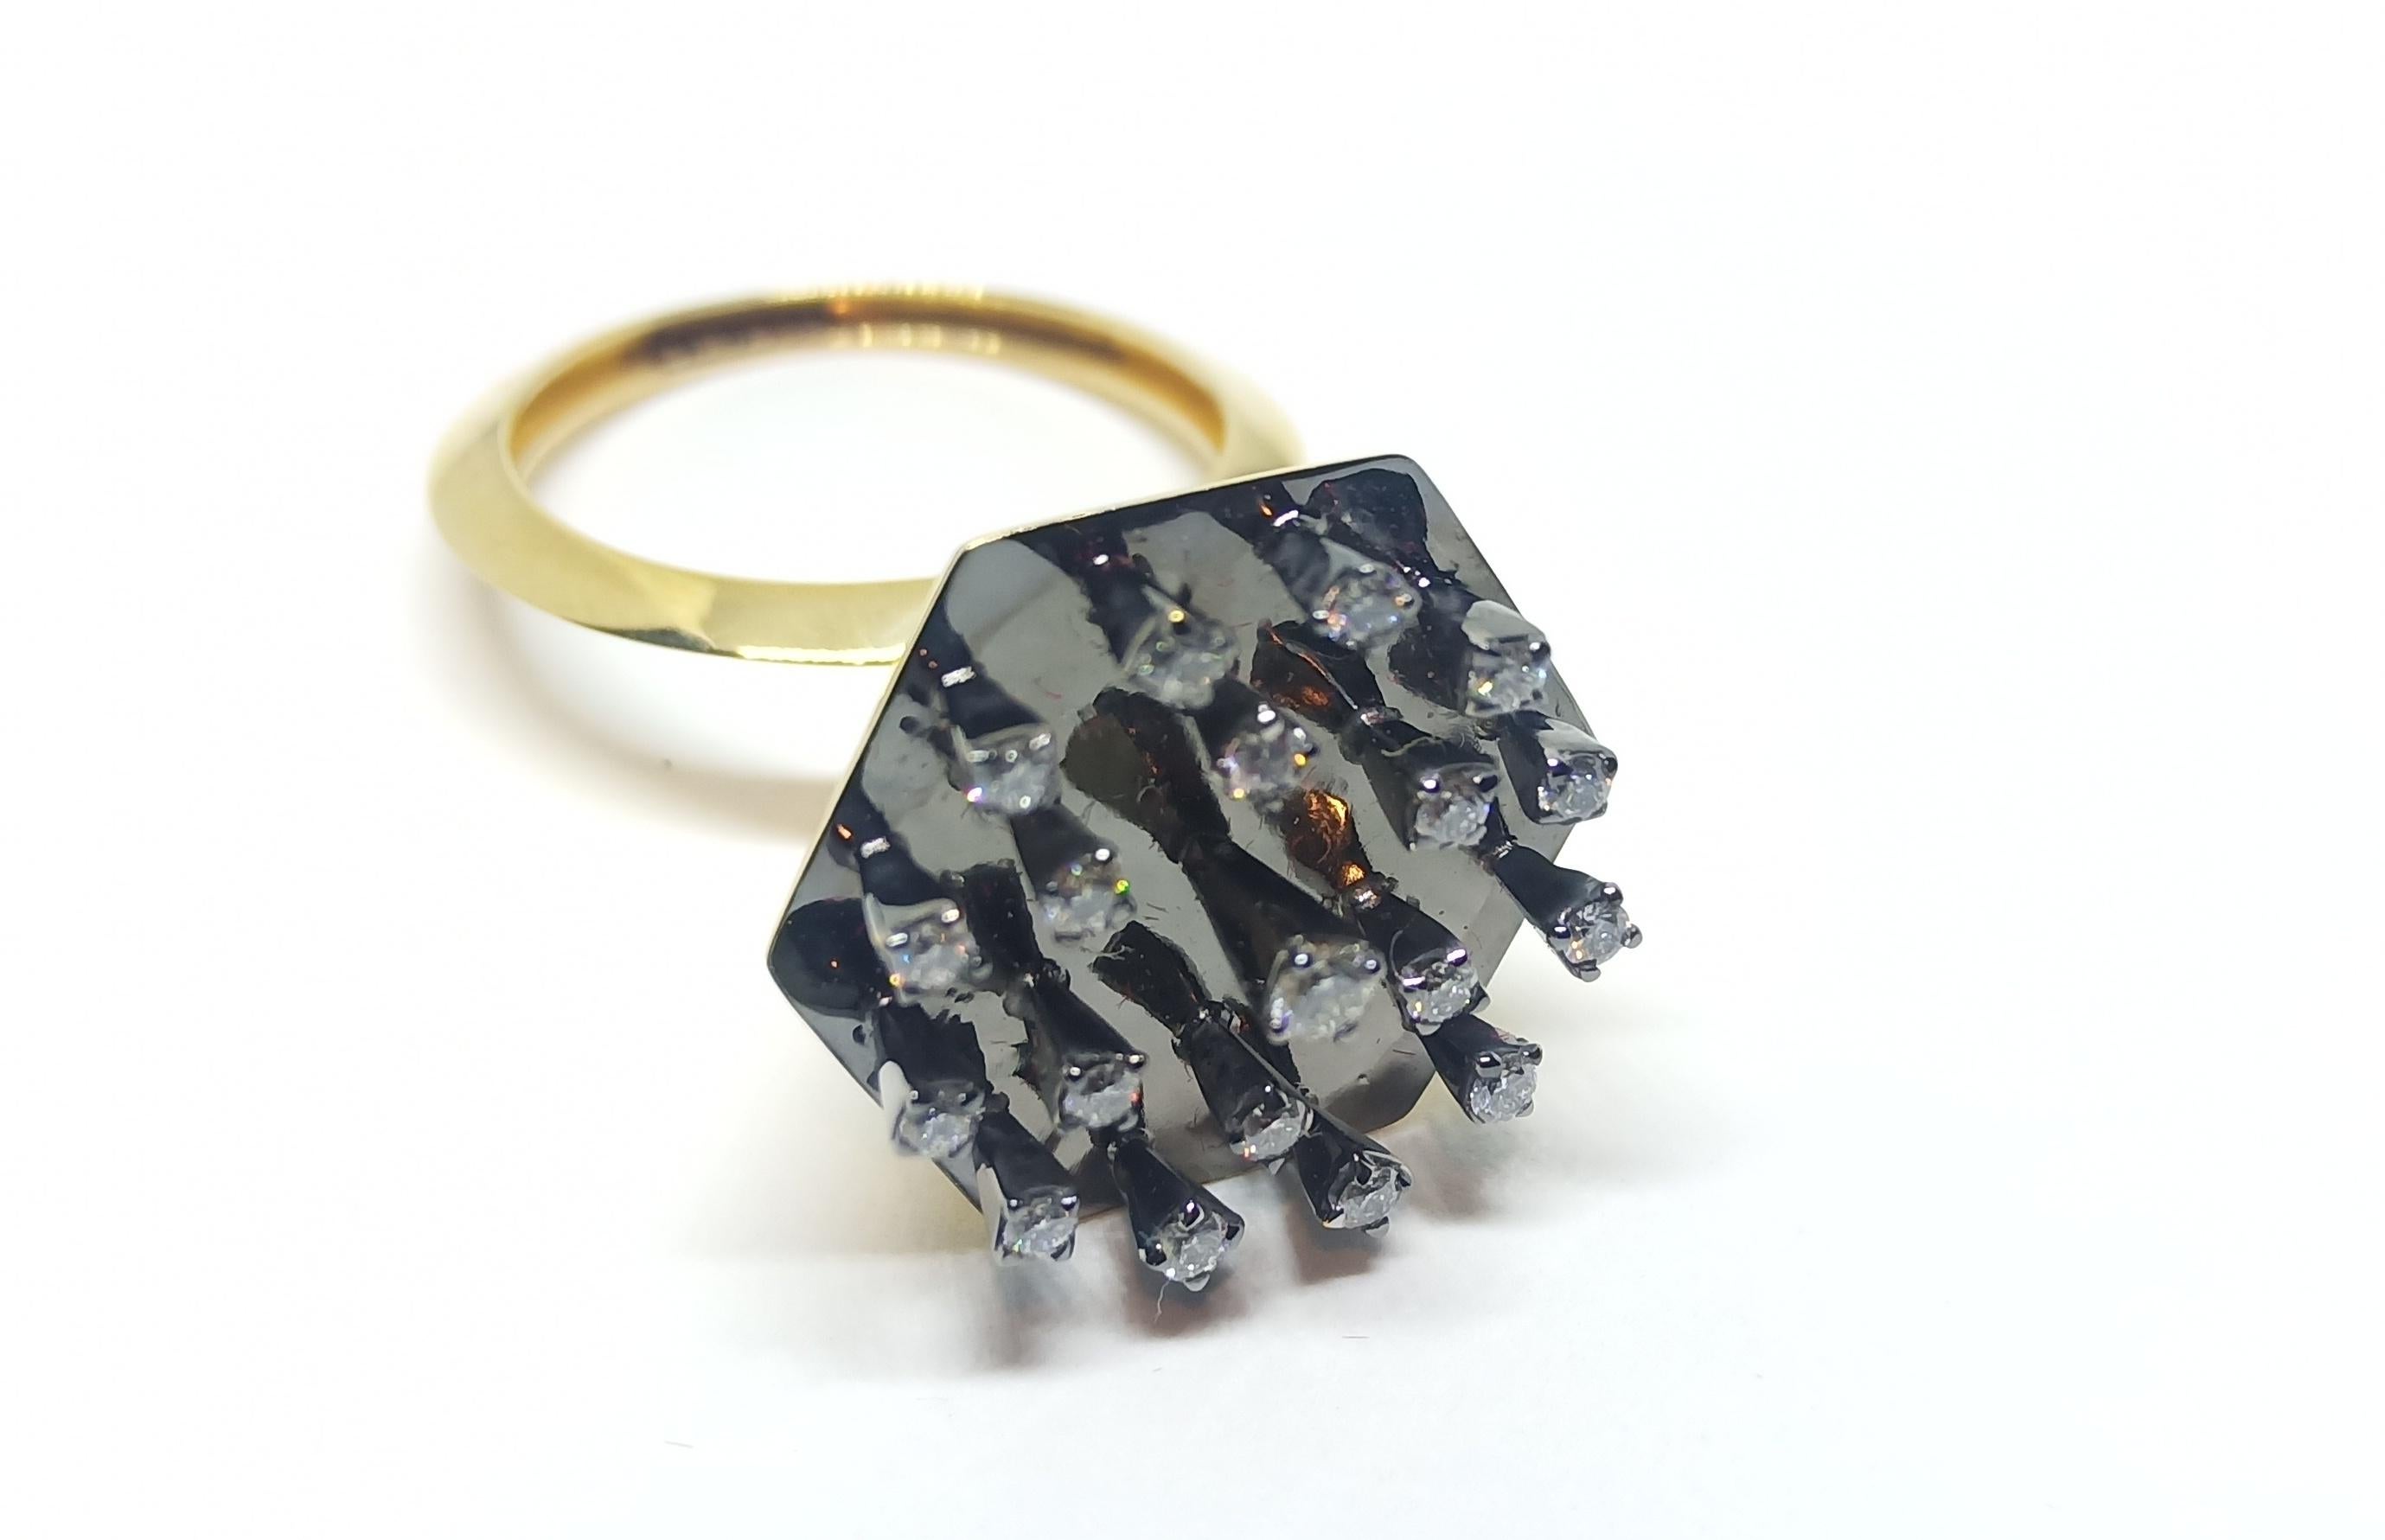 Rohit visualises his creations as ‘None of a Kind’, immensely detailed and meant for the select patrons of Art.
This Contemporary One Of a Kind Fashion Ring by Rohit features unique design elements in the shape of collets and the triangular shaped